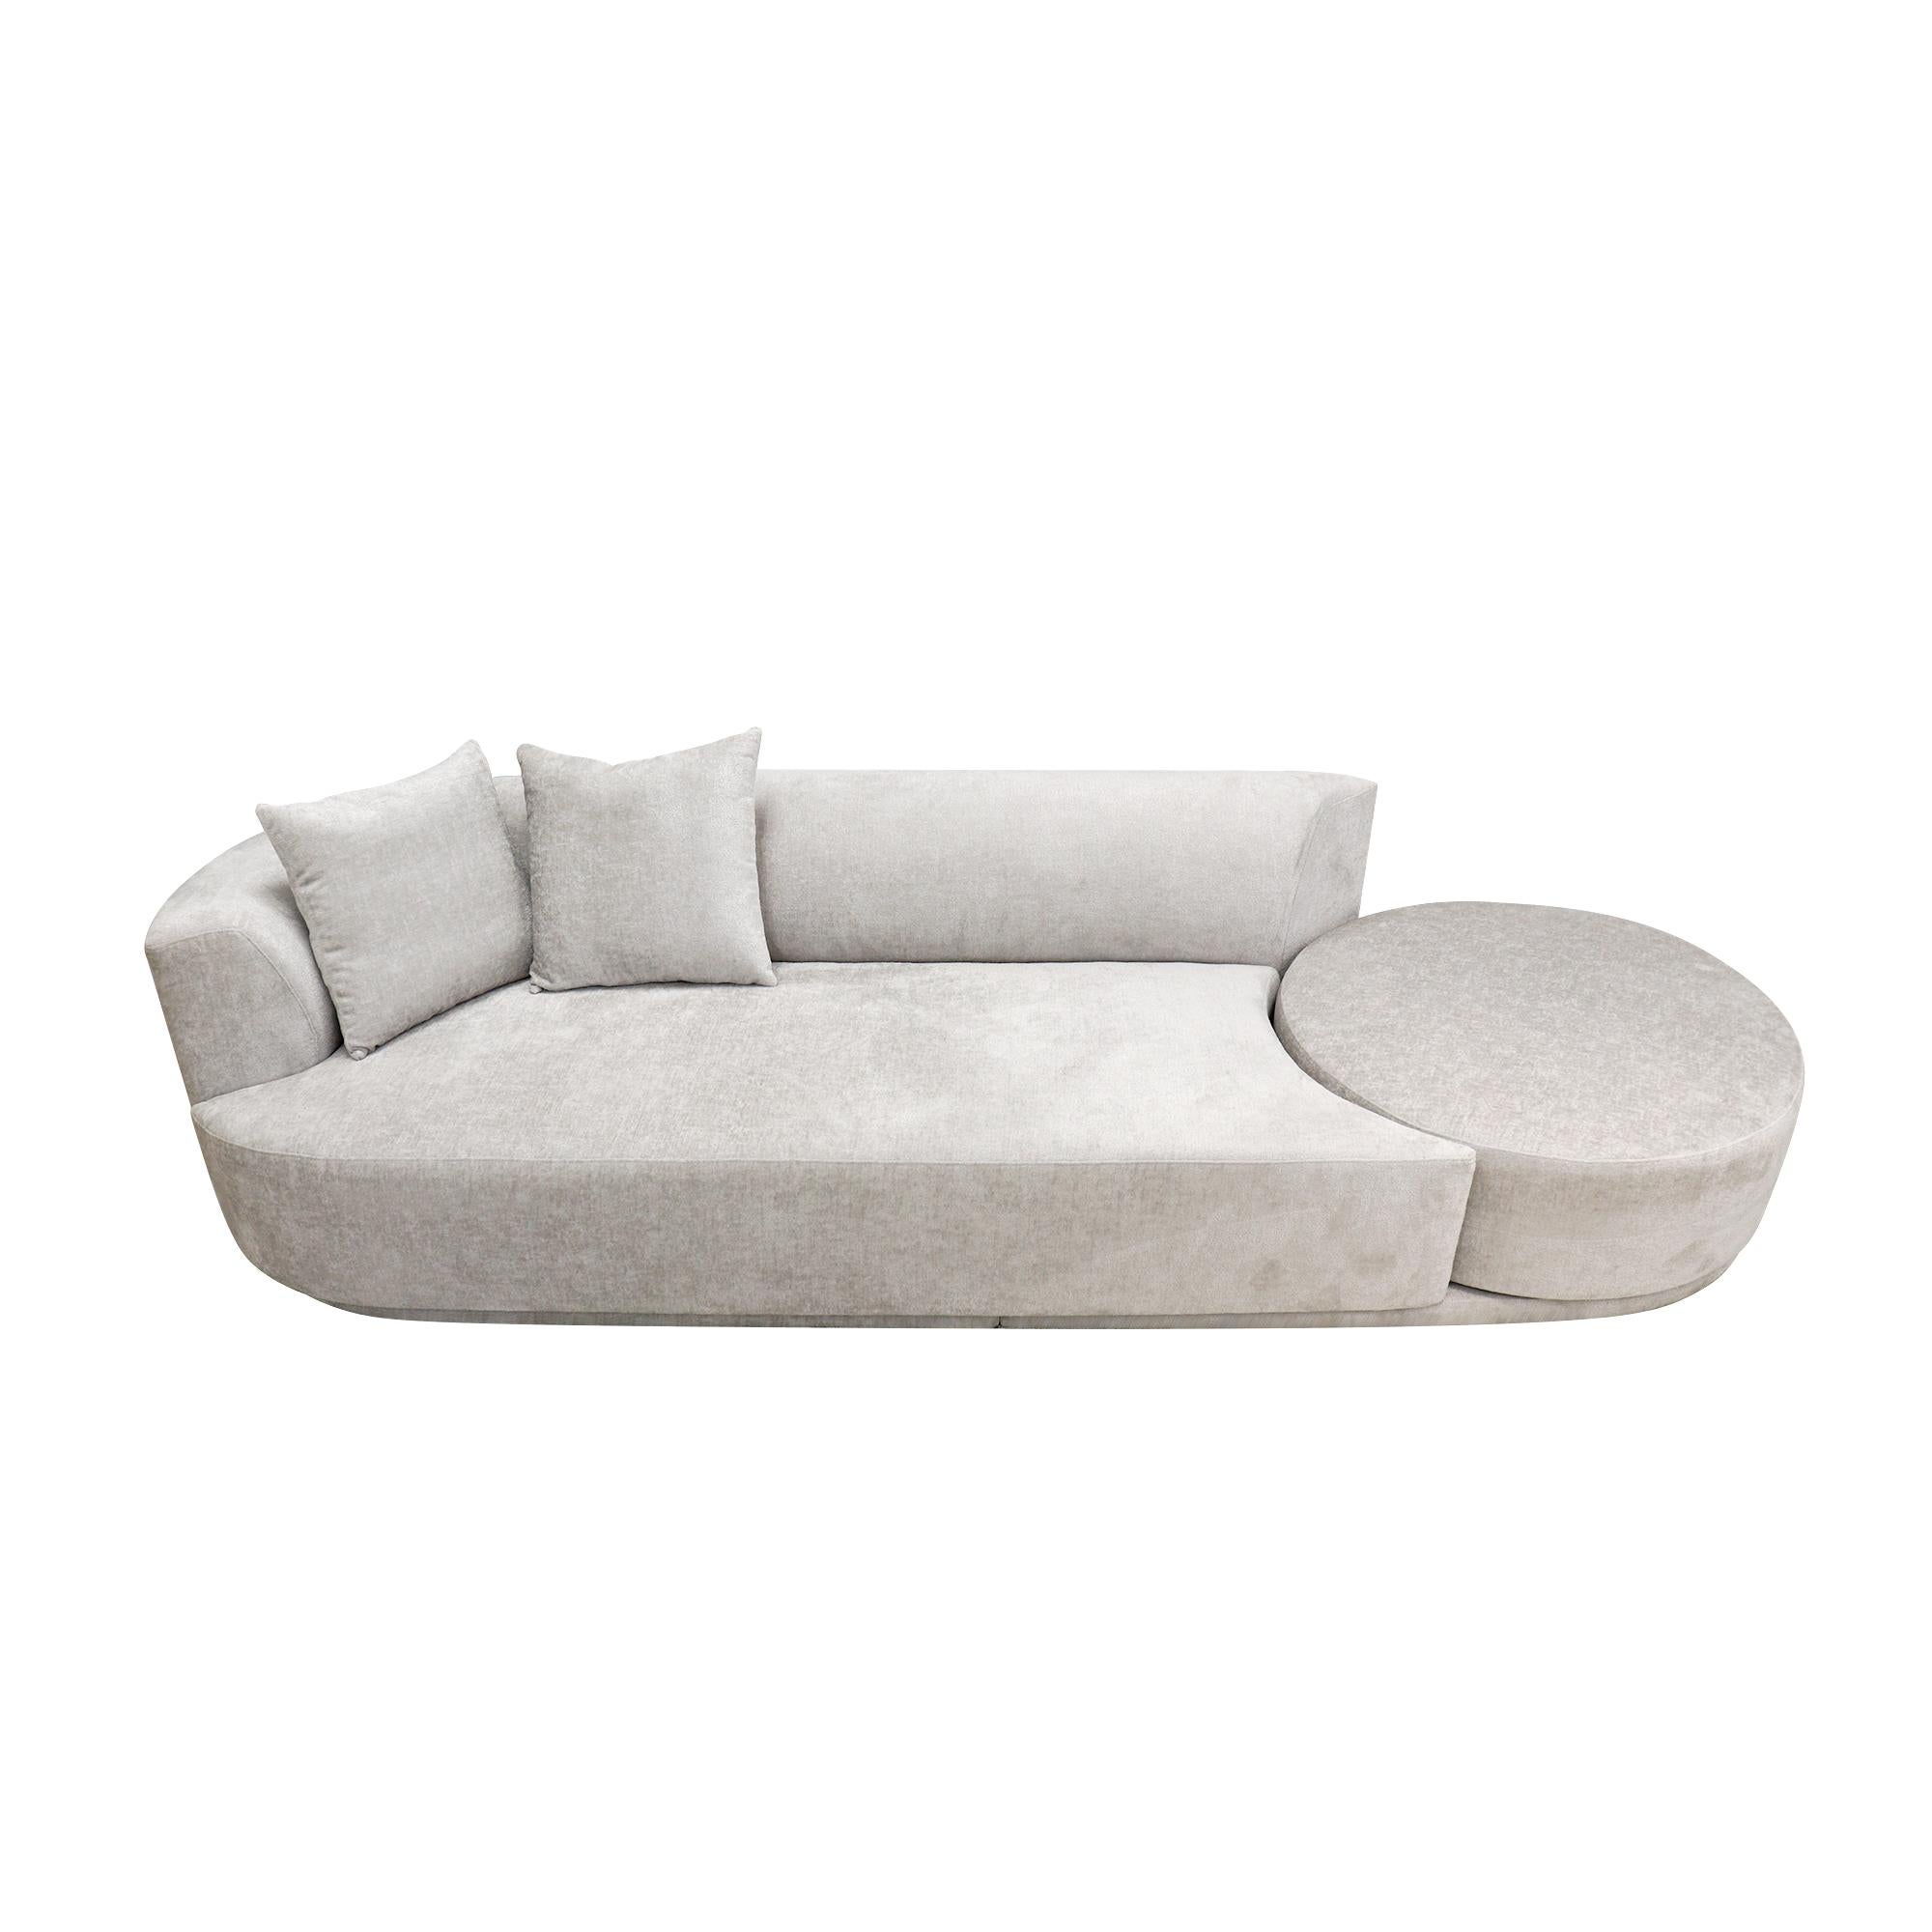 Pasargad Home Noho Cielo Design Sofa with Swivel Ottoman & Pillows In New Condition For Sale In Port Washington, NY